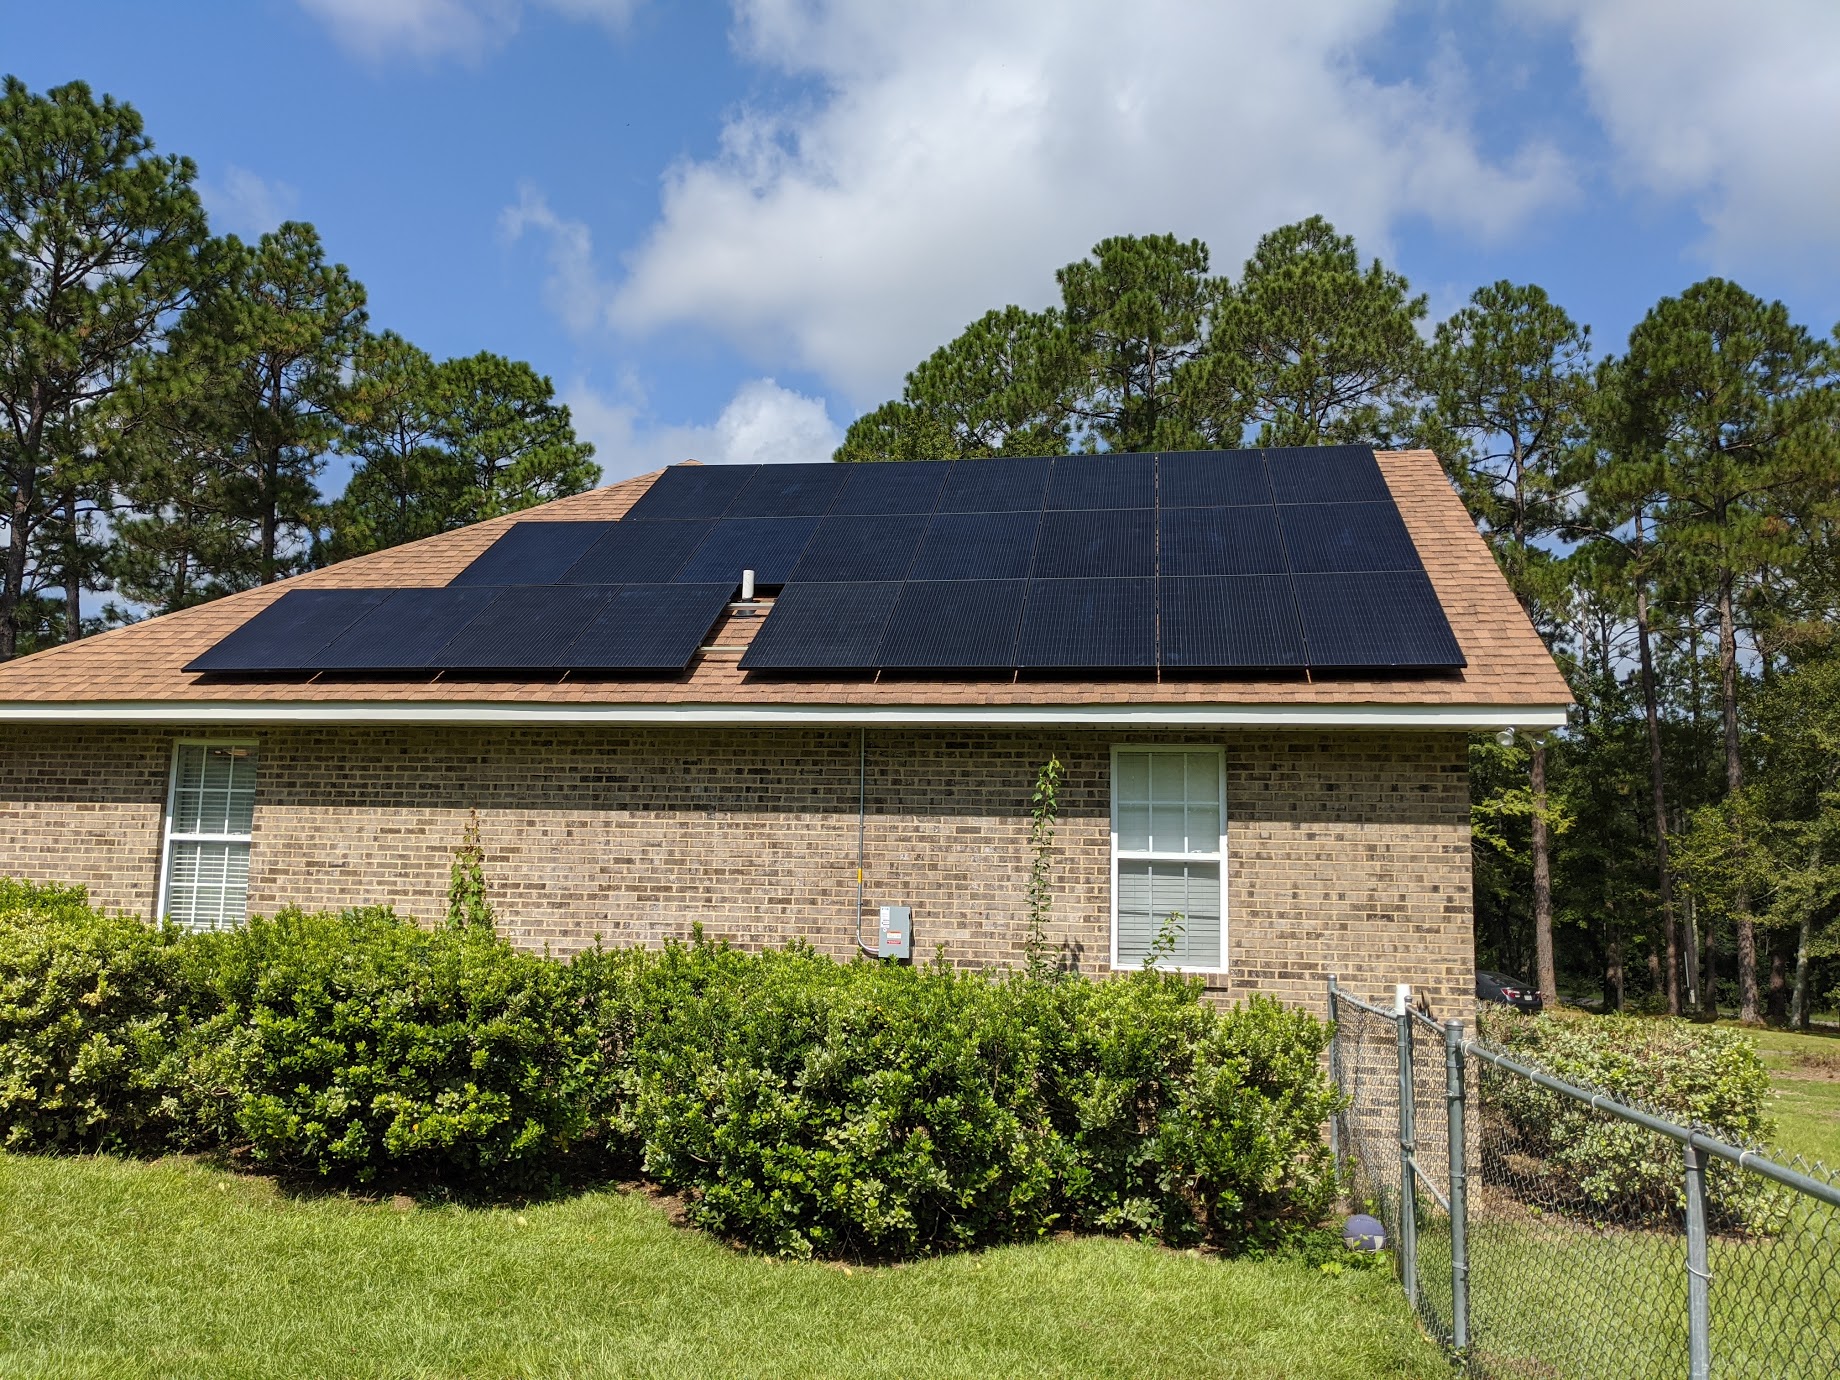 Image 5 - Another large grid tie with battery backup system in Hawkinsville, Georgia.